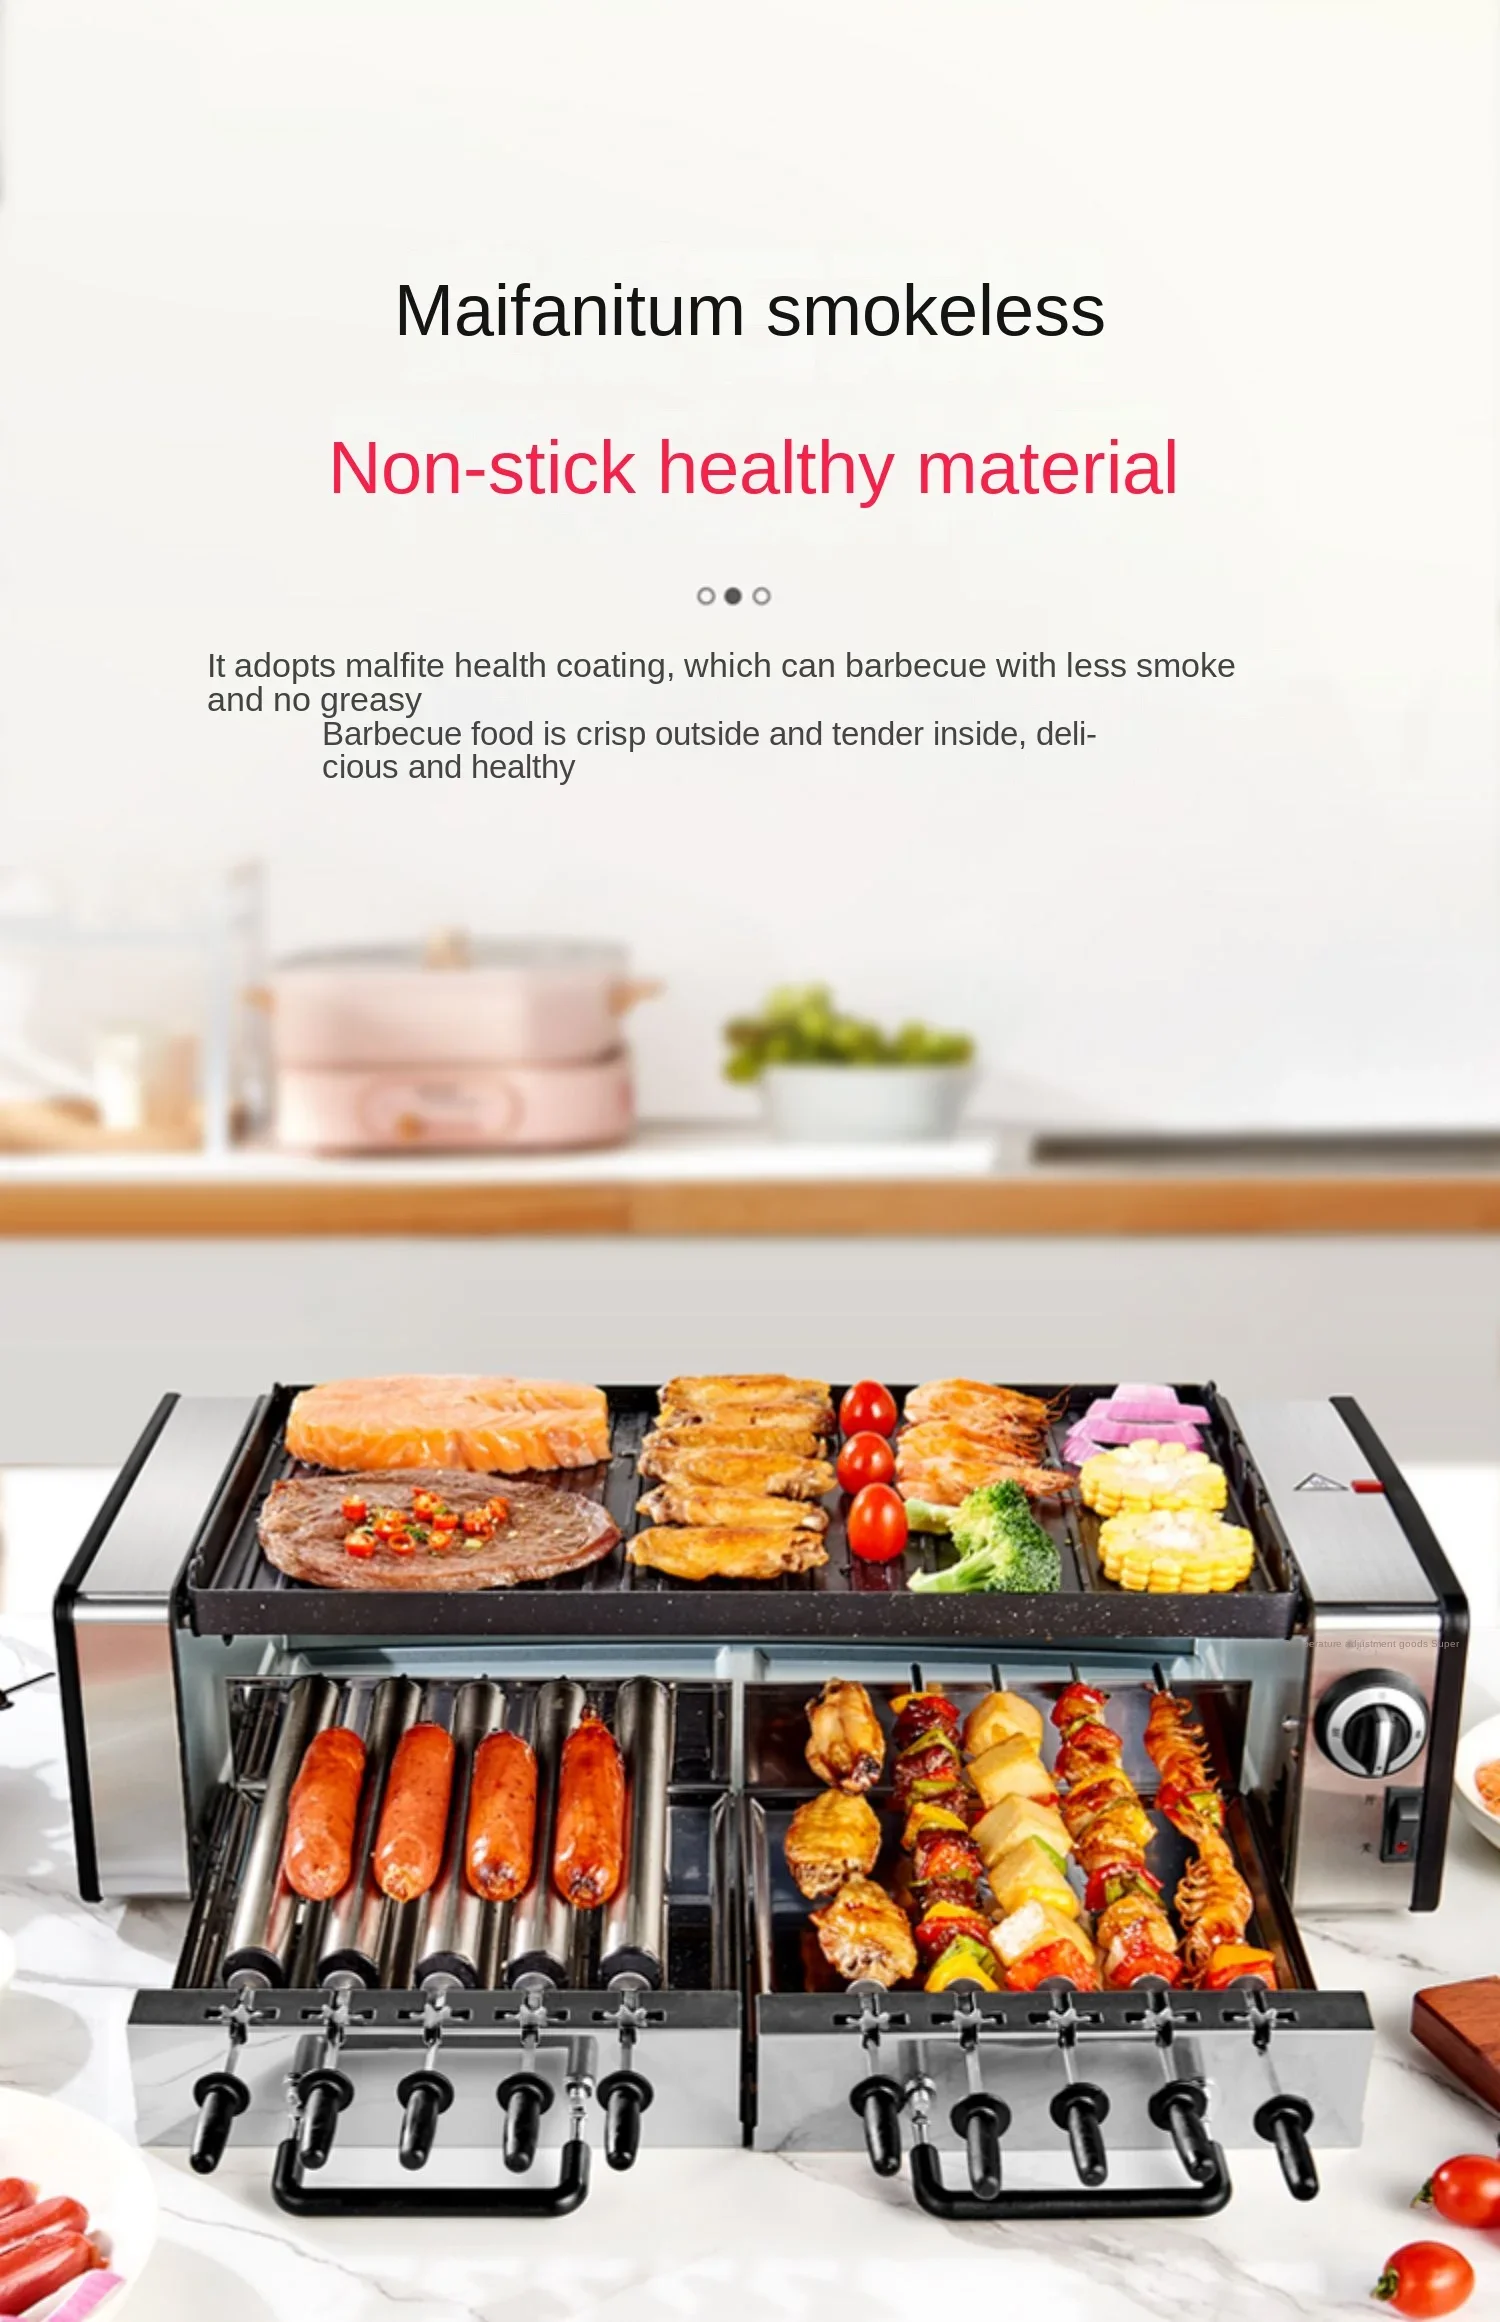 Hao color TV oven home smokeless barbecue electric baking pan barbecue grill automatic.